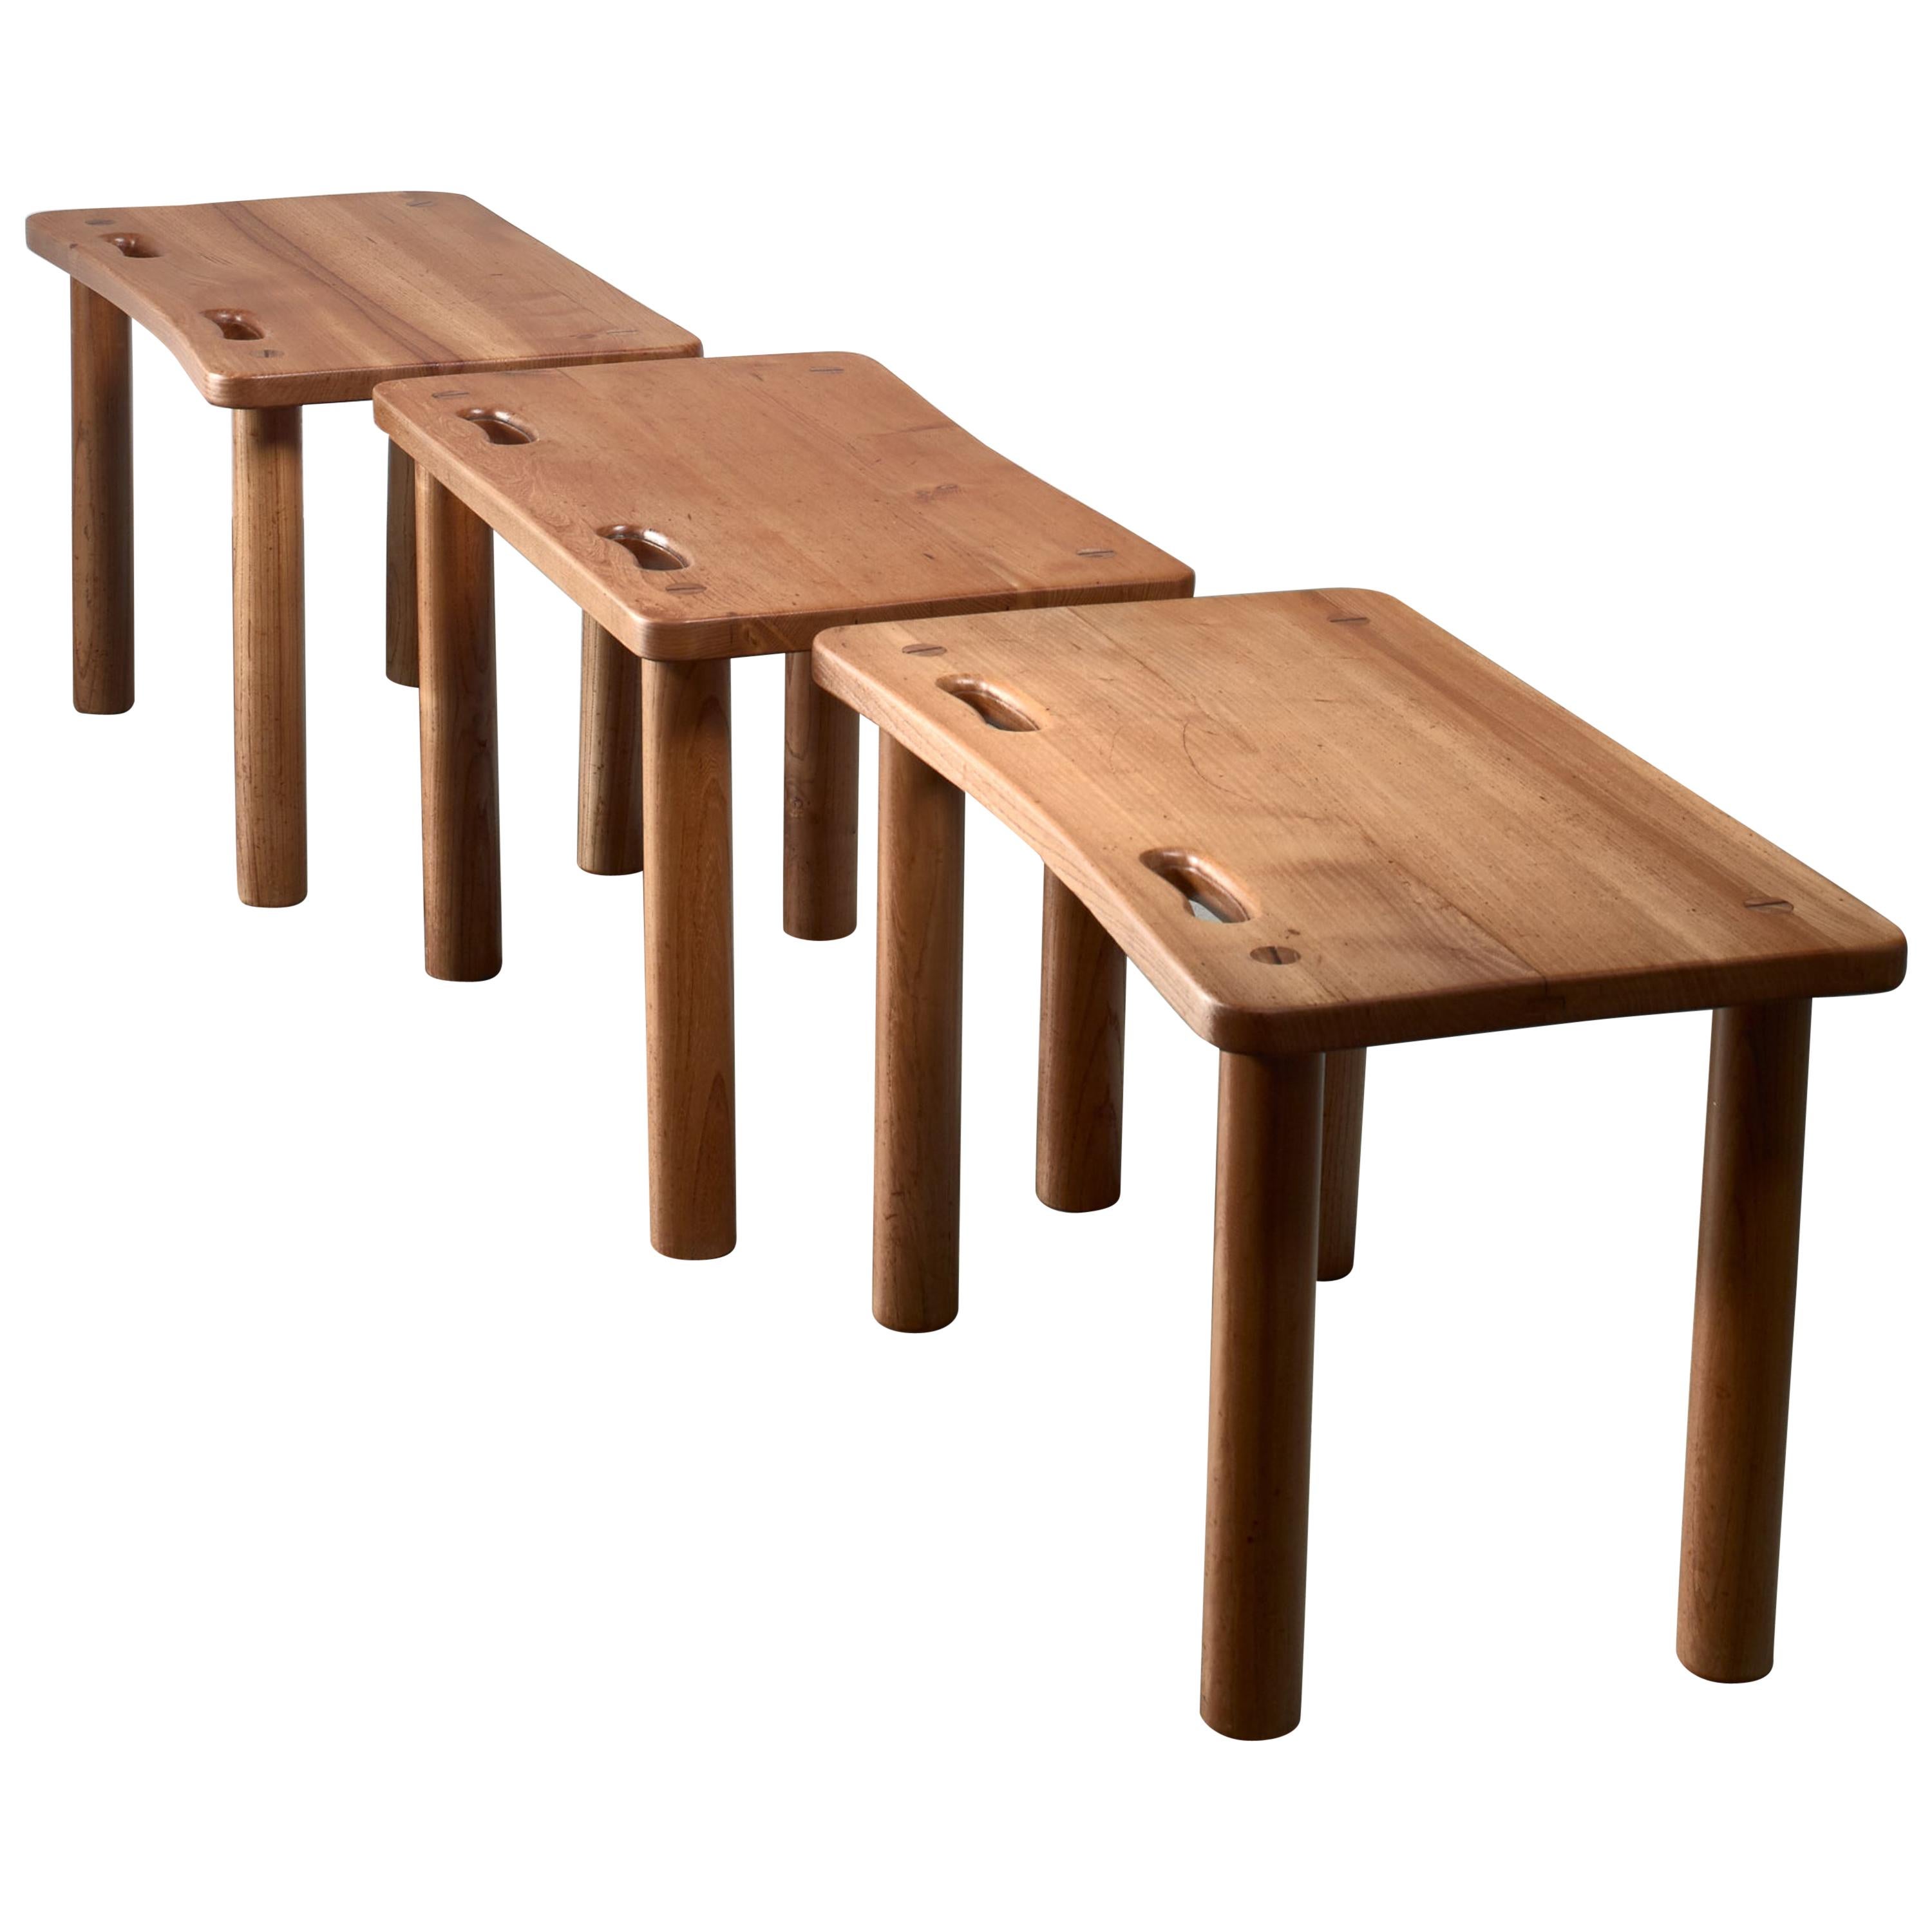 Set of Three Pine Benches or Side Tables in Campaign Style